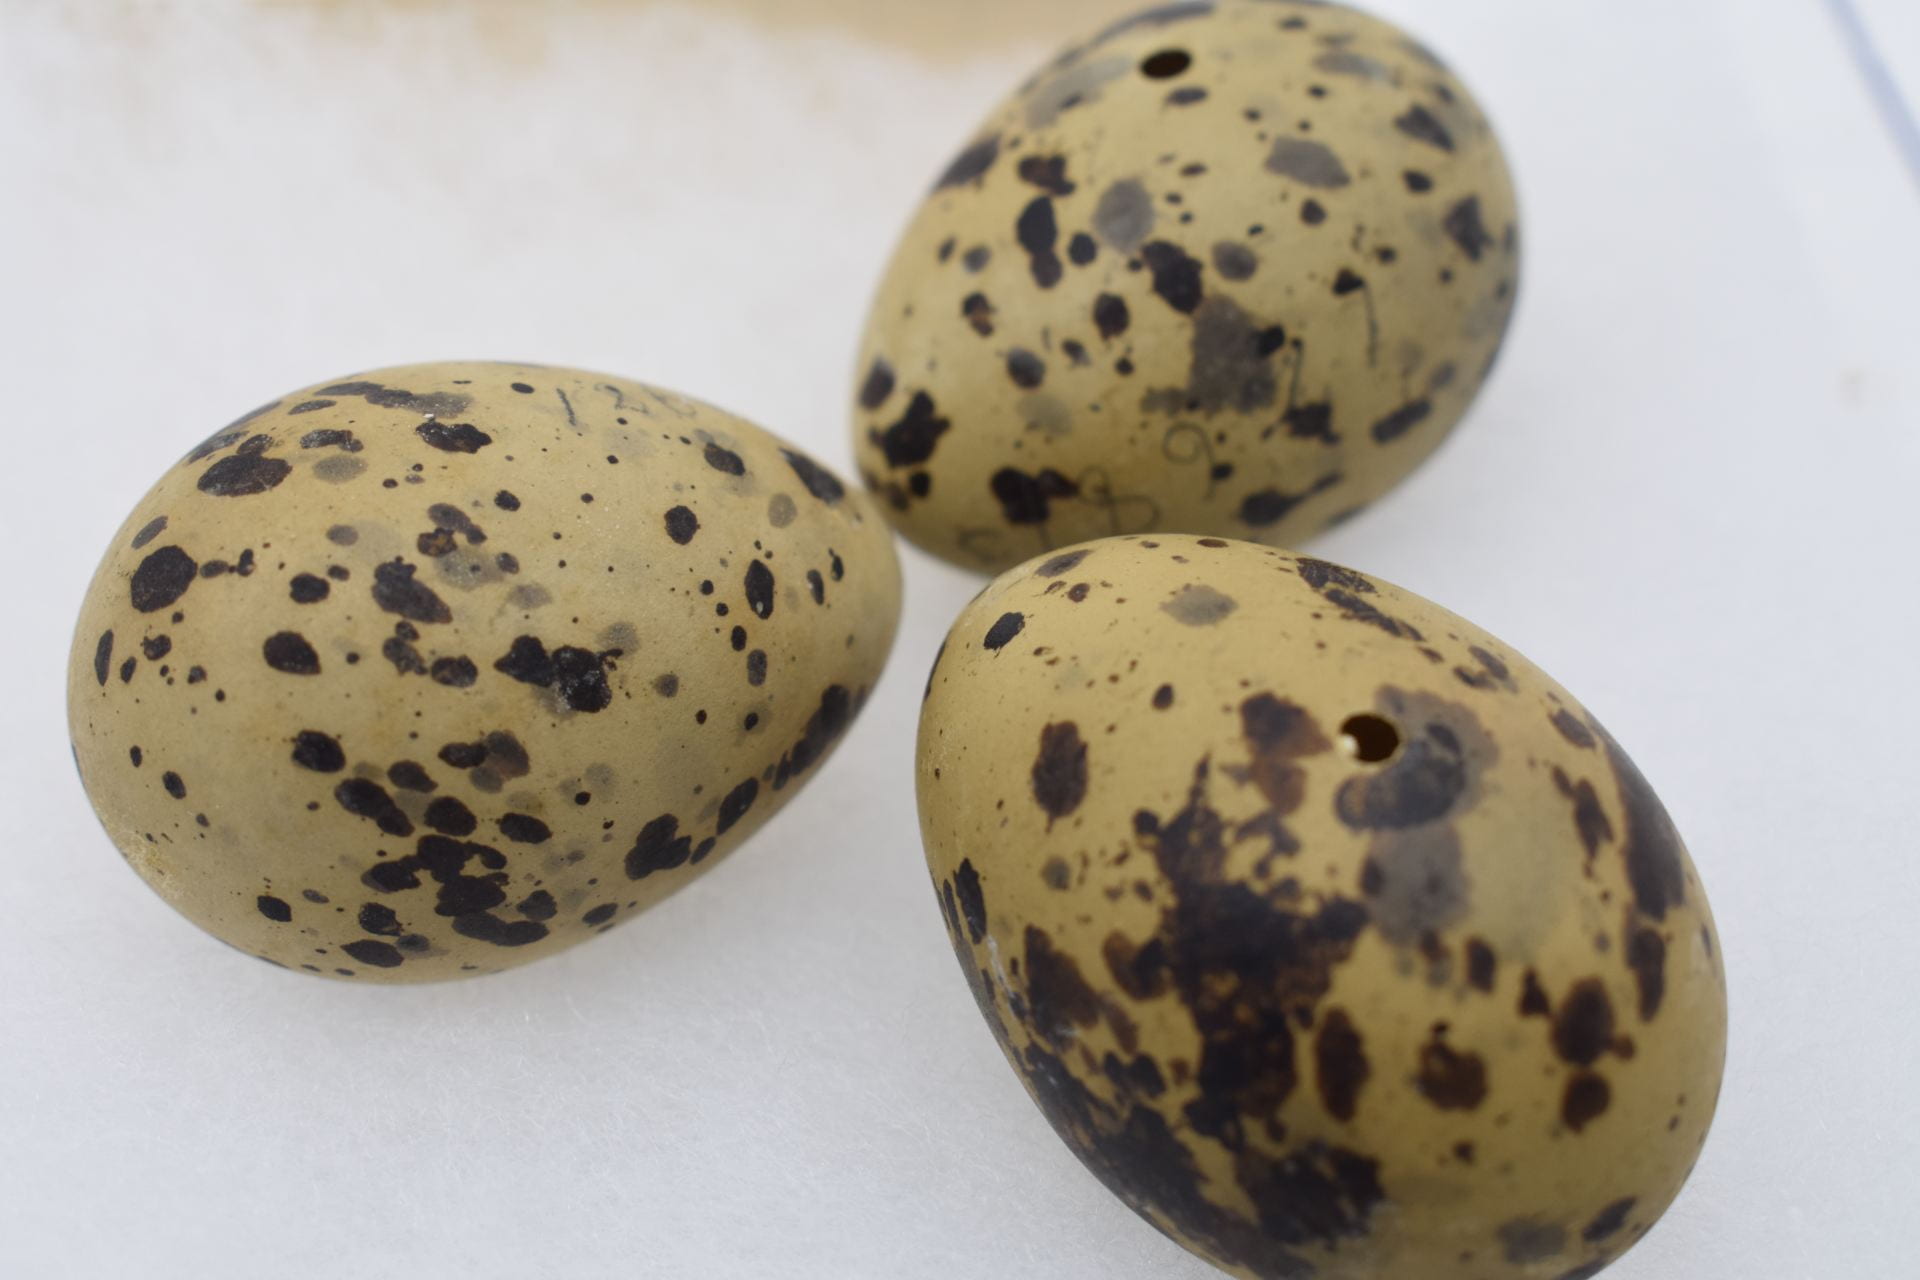 Three tan eggs with large dark brown spots all over them.